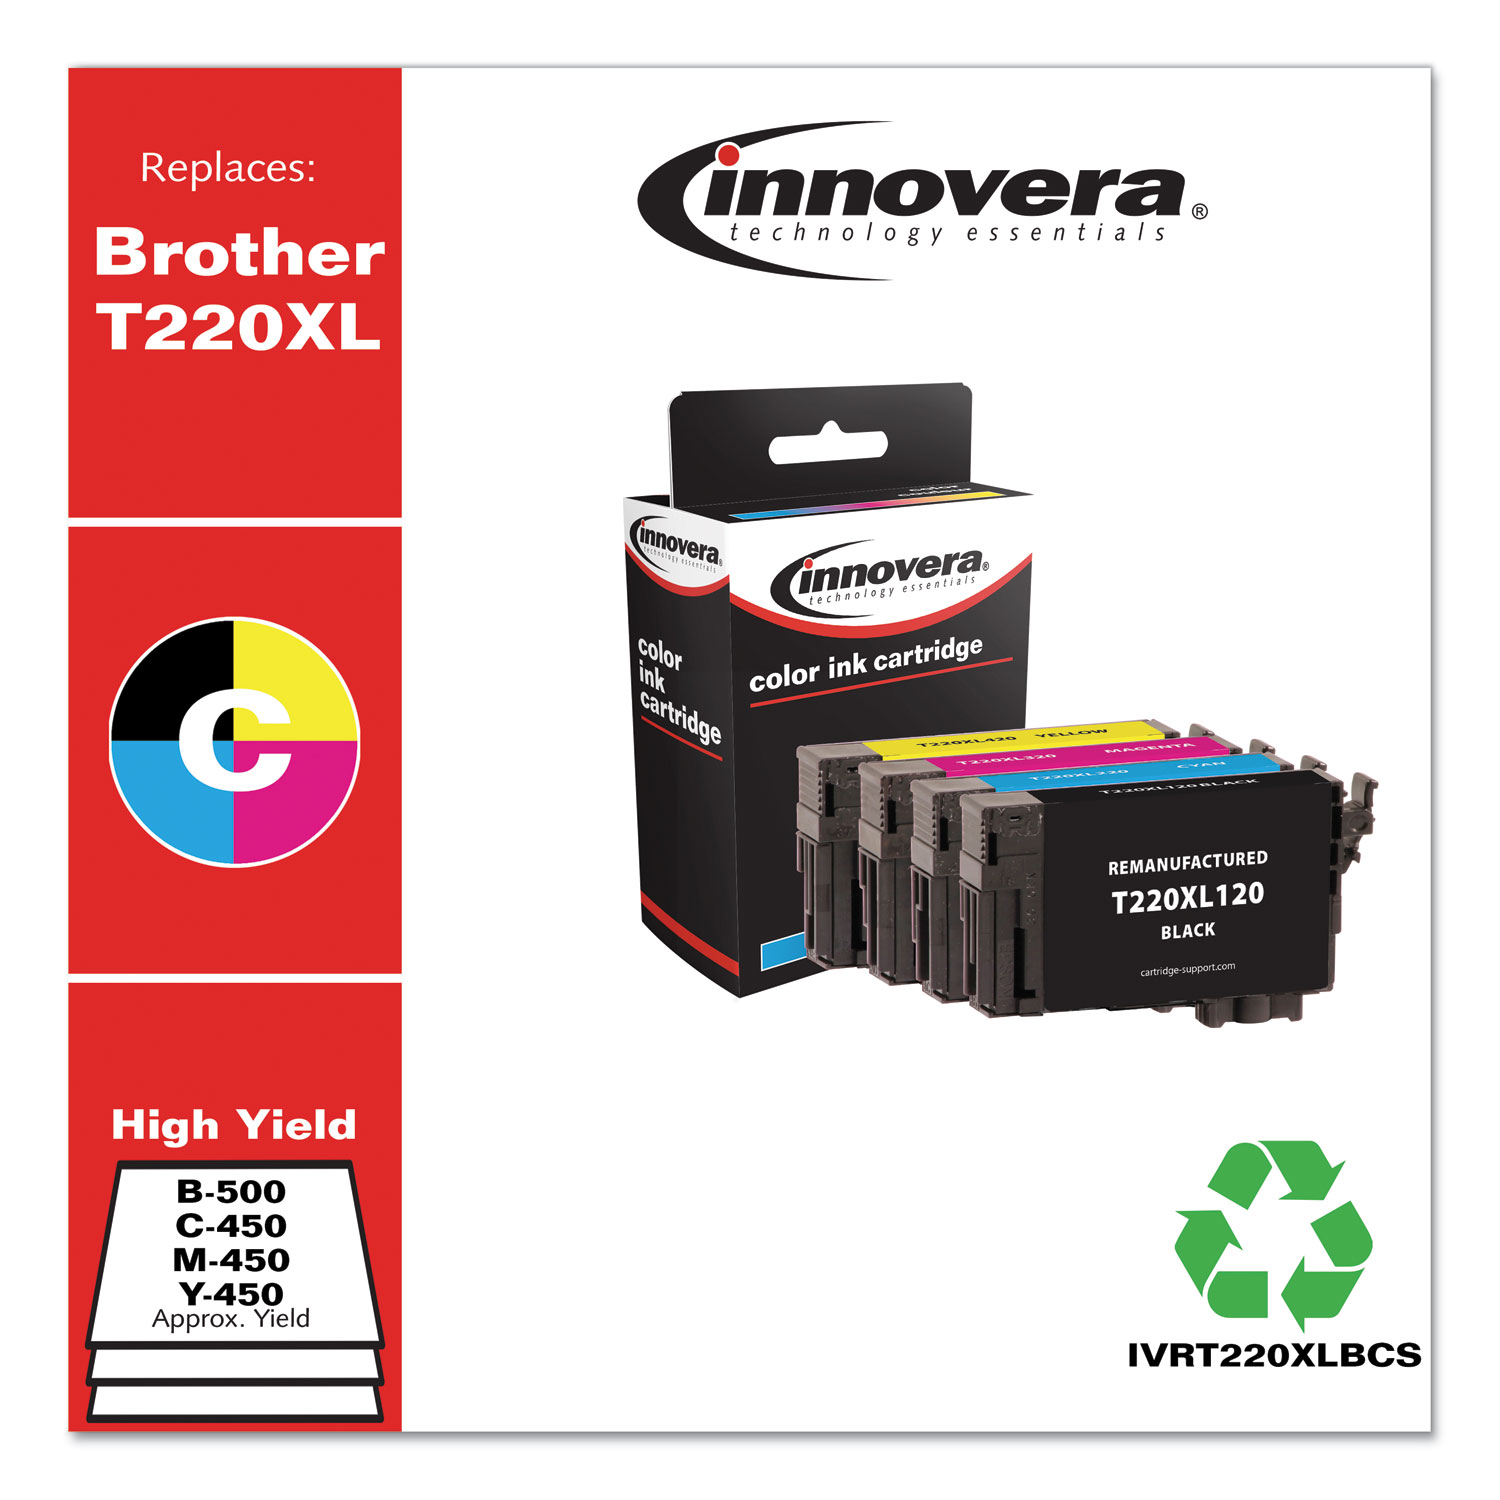  Innovera IVRT220XLBCS Remanufactured Black/Cyan/Magenta/Yellow Ink, Replacement for Epson T220XL (T220XL120/220/320/420), 500/450 Page-Yield (IVRT220XLBCS) 